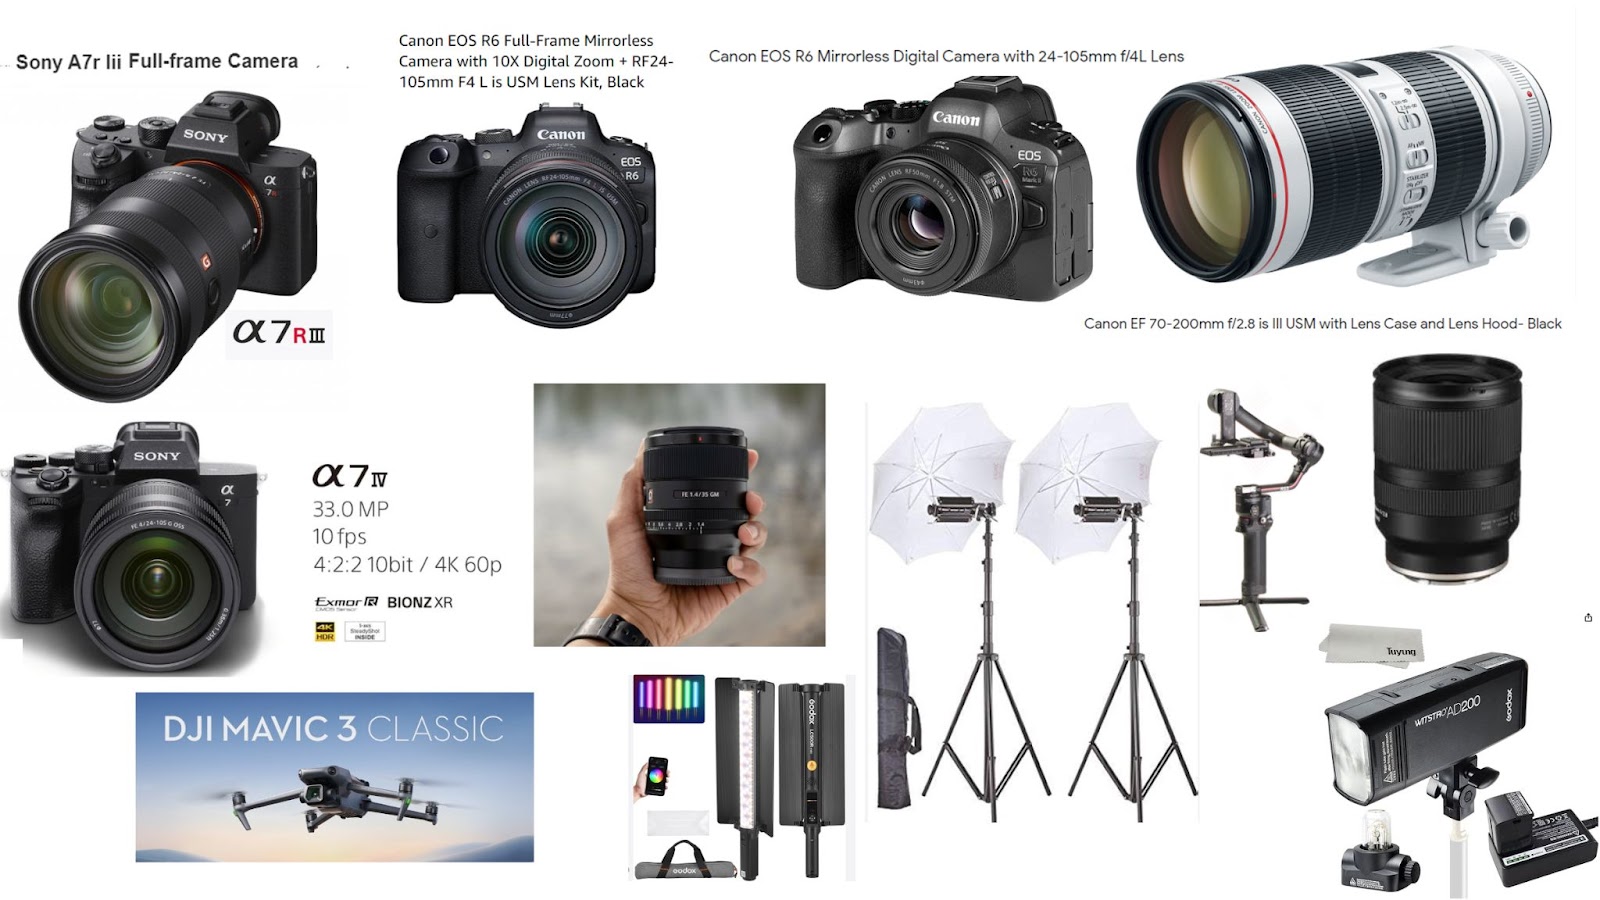 Photography equipment picture - This image showcases a professional array of photography equipment including a Sony full-frame mirrorless camera, a Canon full-frame mirrorless camera, lenses (24-105mm, 70-200mm, 50mm, 35mm), a portable light, studio light, Godox AD200Pro TTL pocket flash, DJI RS gimbal stabilizer, and LC light. These tools, used by the best wedding photographer in Indore, highlight their commitment to capturing high-quality and creative wedding photos. Perfect for those hiring a wedding photographer in Indore, this setup ensures top-tier wedding photography services and stunning results in every shot.